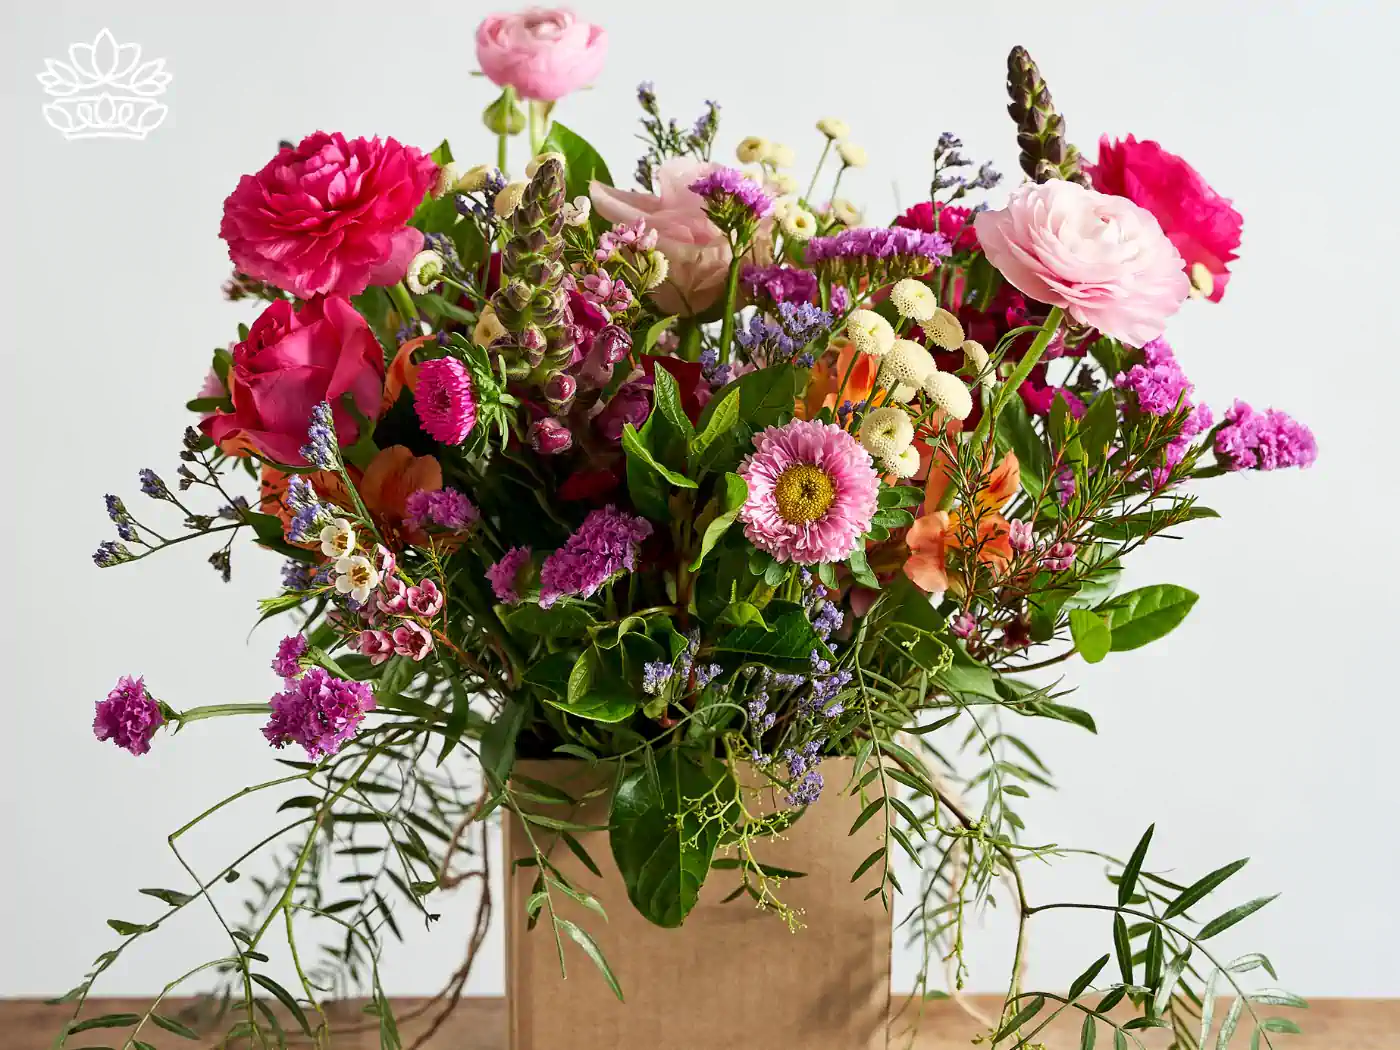 Exquisite wildflower arrangement in a rustic brown paper bag, featuring bold pink roses, delicate lavender sprigs, soft pink ranunculus, and vibrant seasonal blooms. 